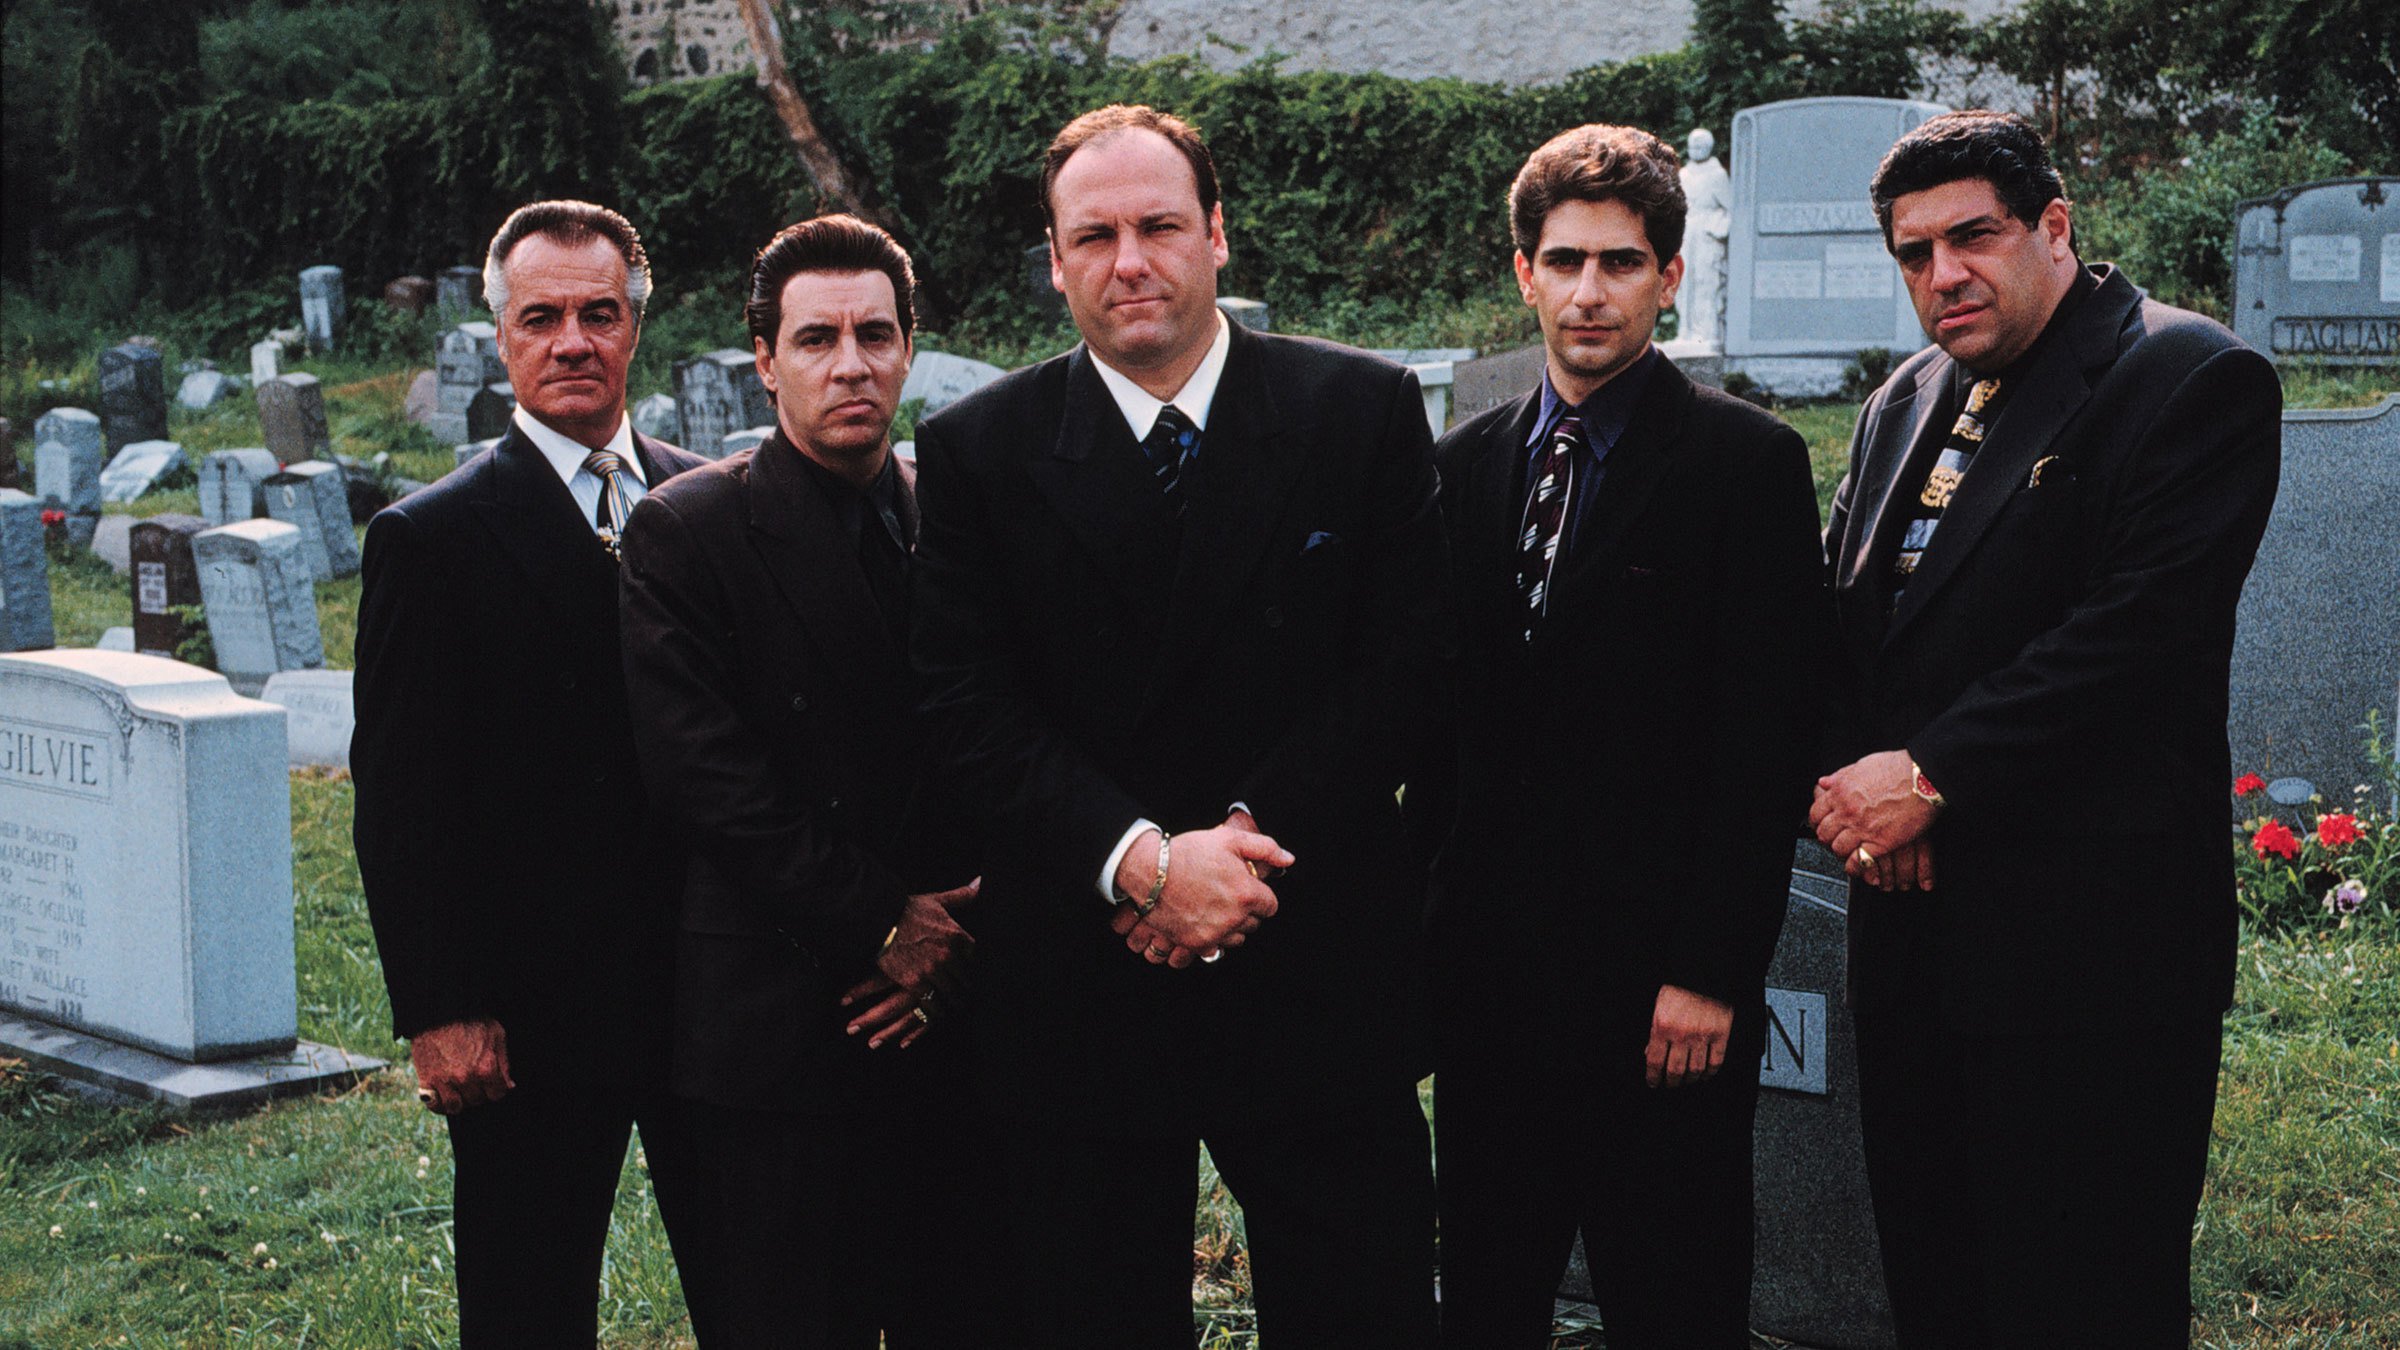 TV Show The Sopranos HD Wallpaper | Background Image